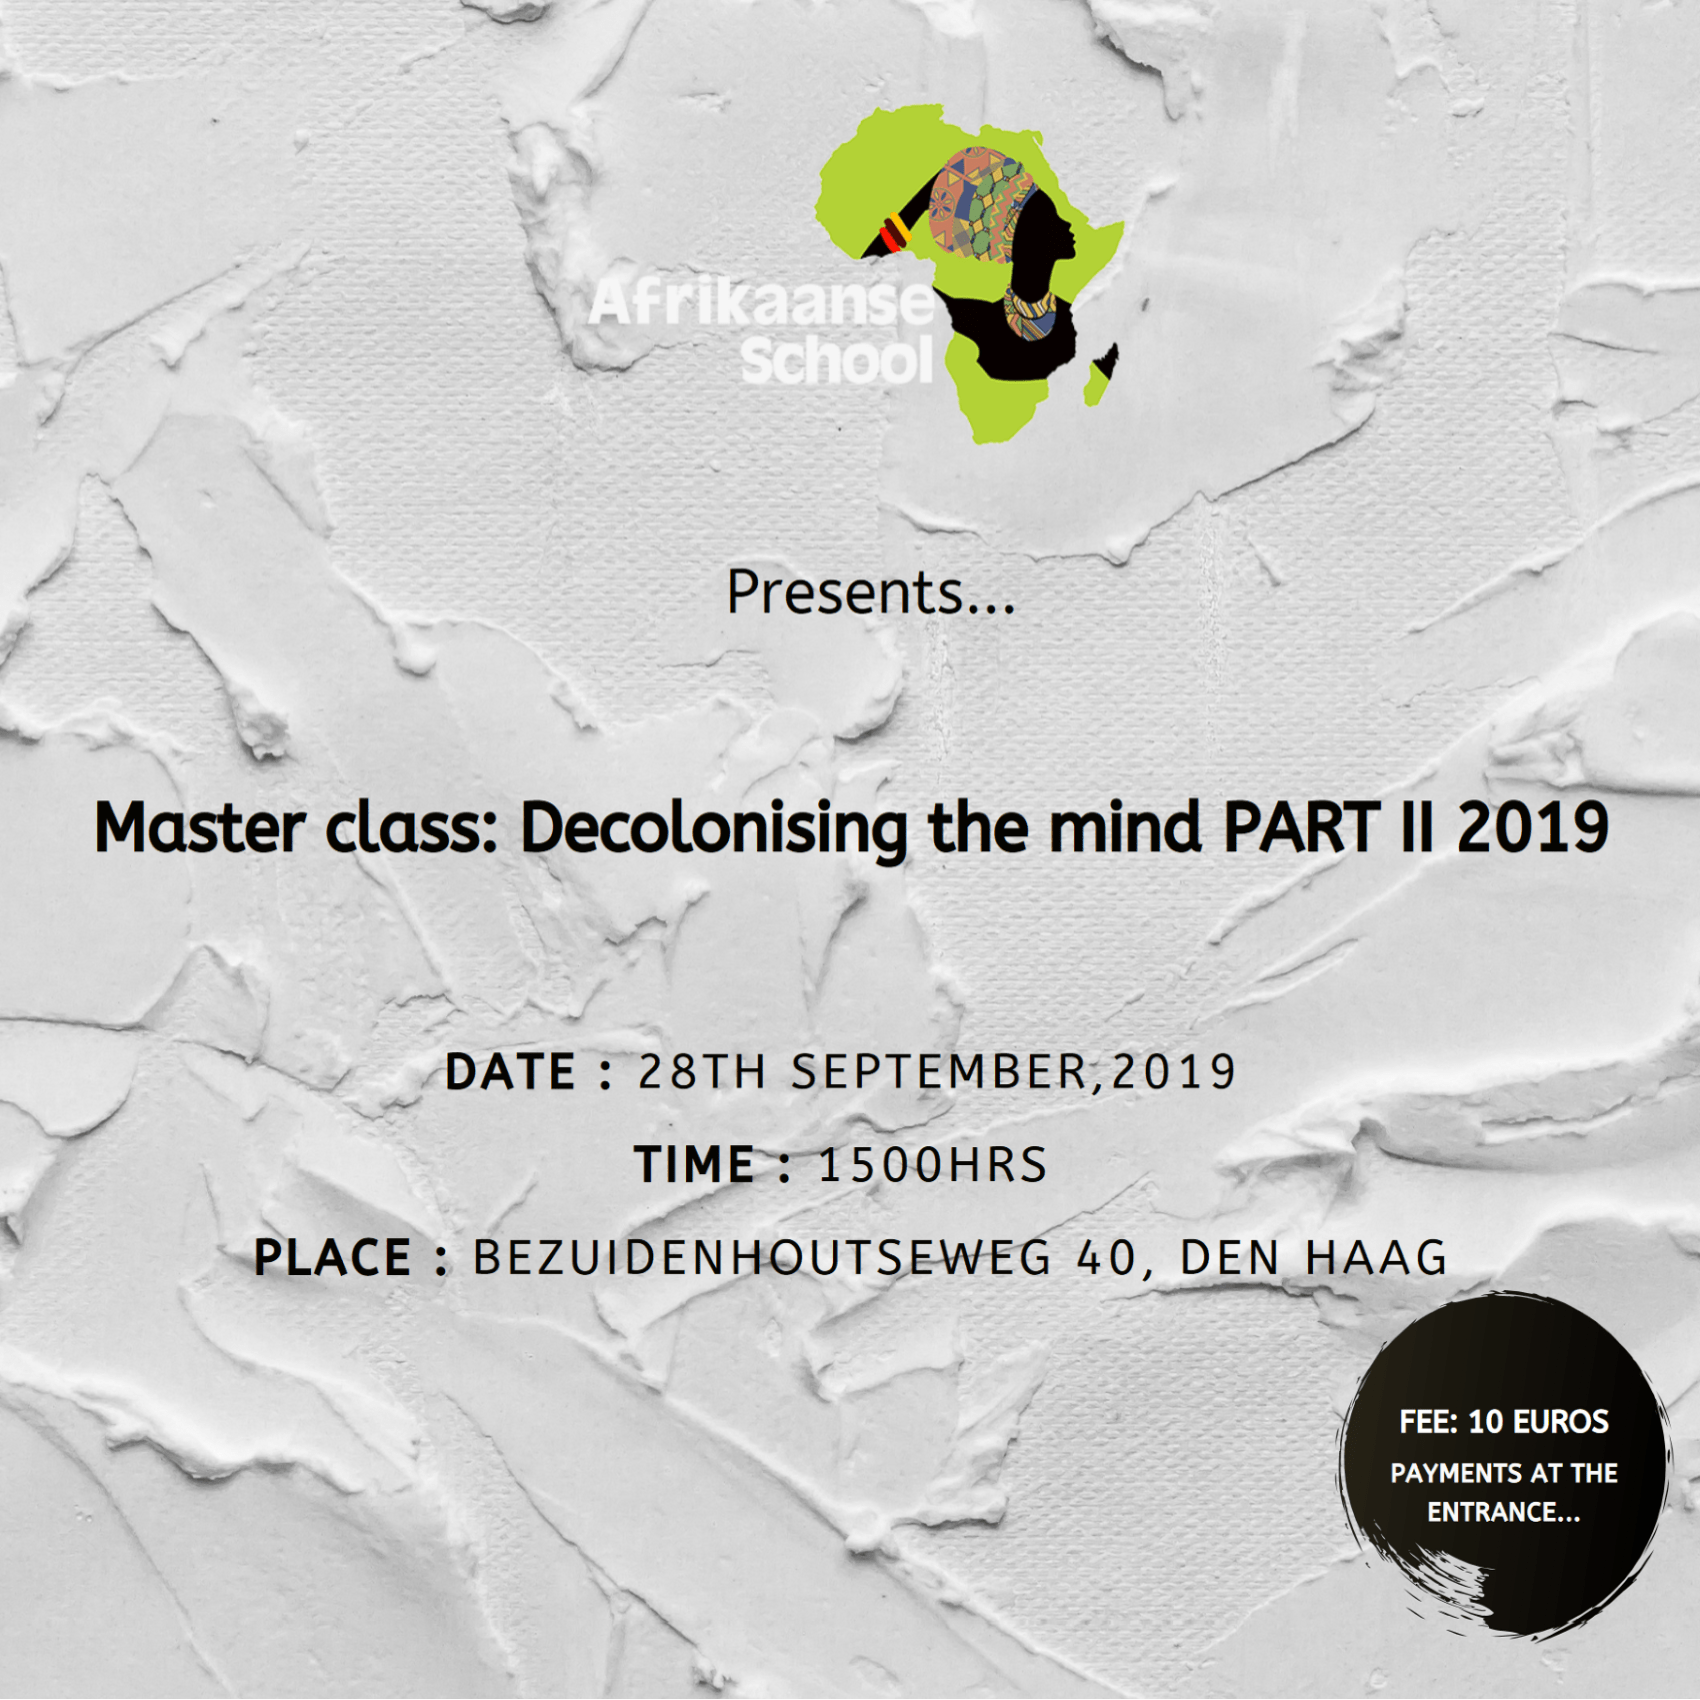 Master class Decolonising the mind Part II